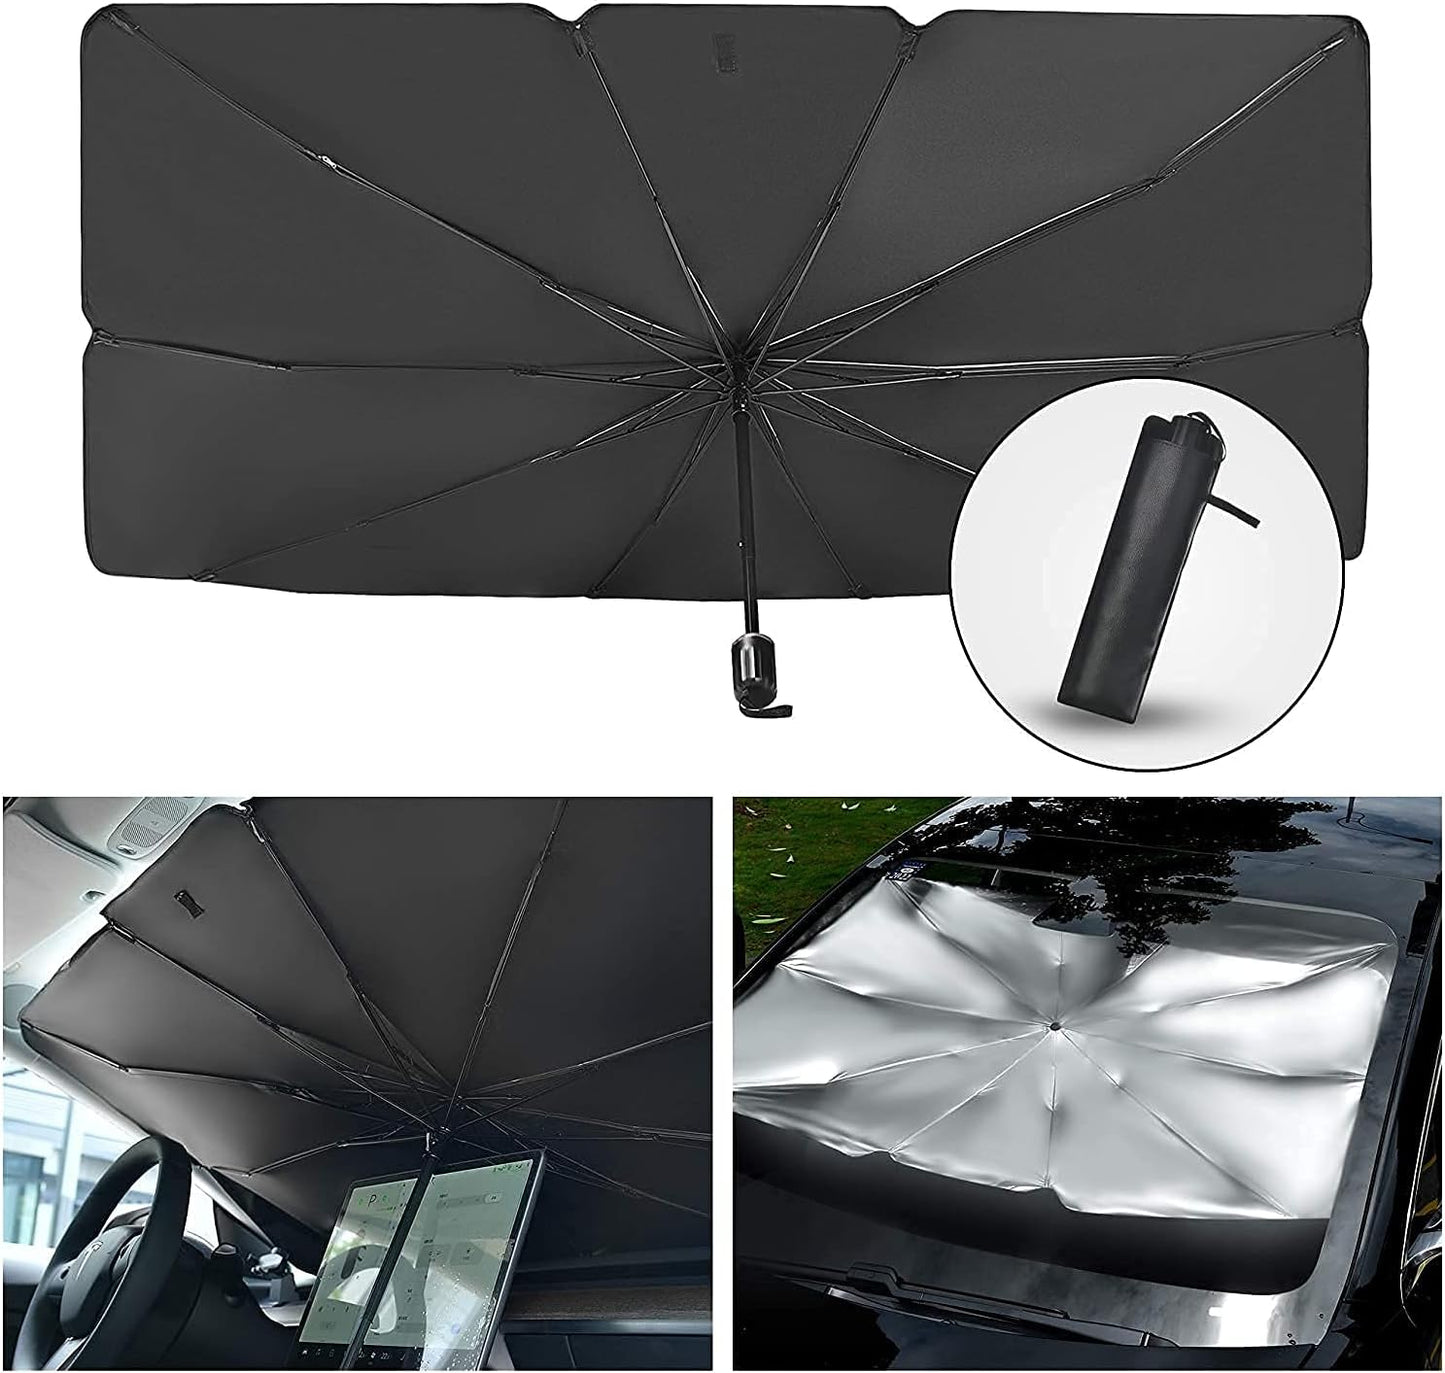 Enew Car Sun Shade,for Car Front Windshield, Car Umbrella Sun Shade Cover, Foldable UV Reflector And Heat, Sunshade for Cars, Fits Most Vans SUVS (57 x 31 In), Black